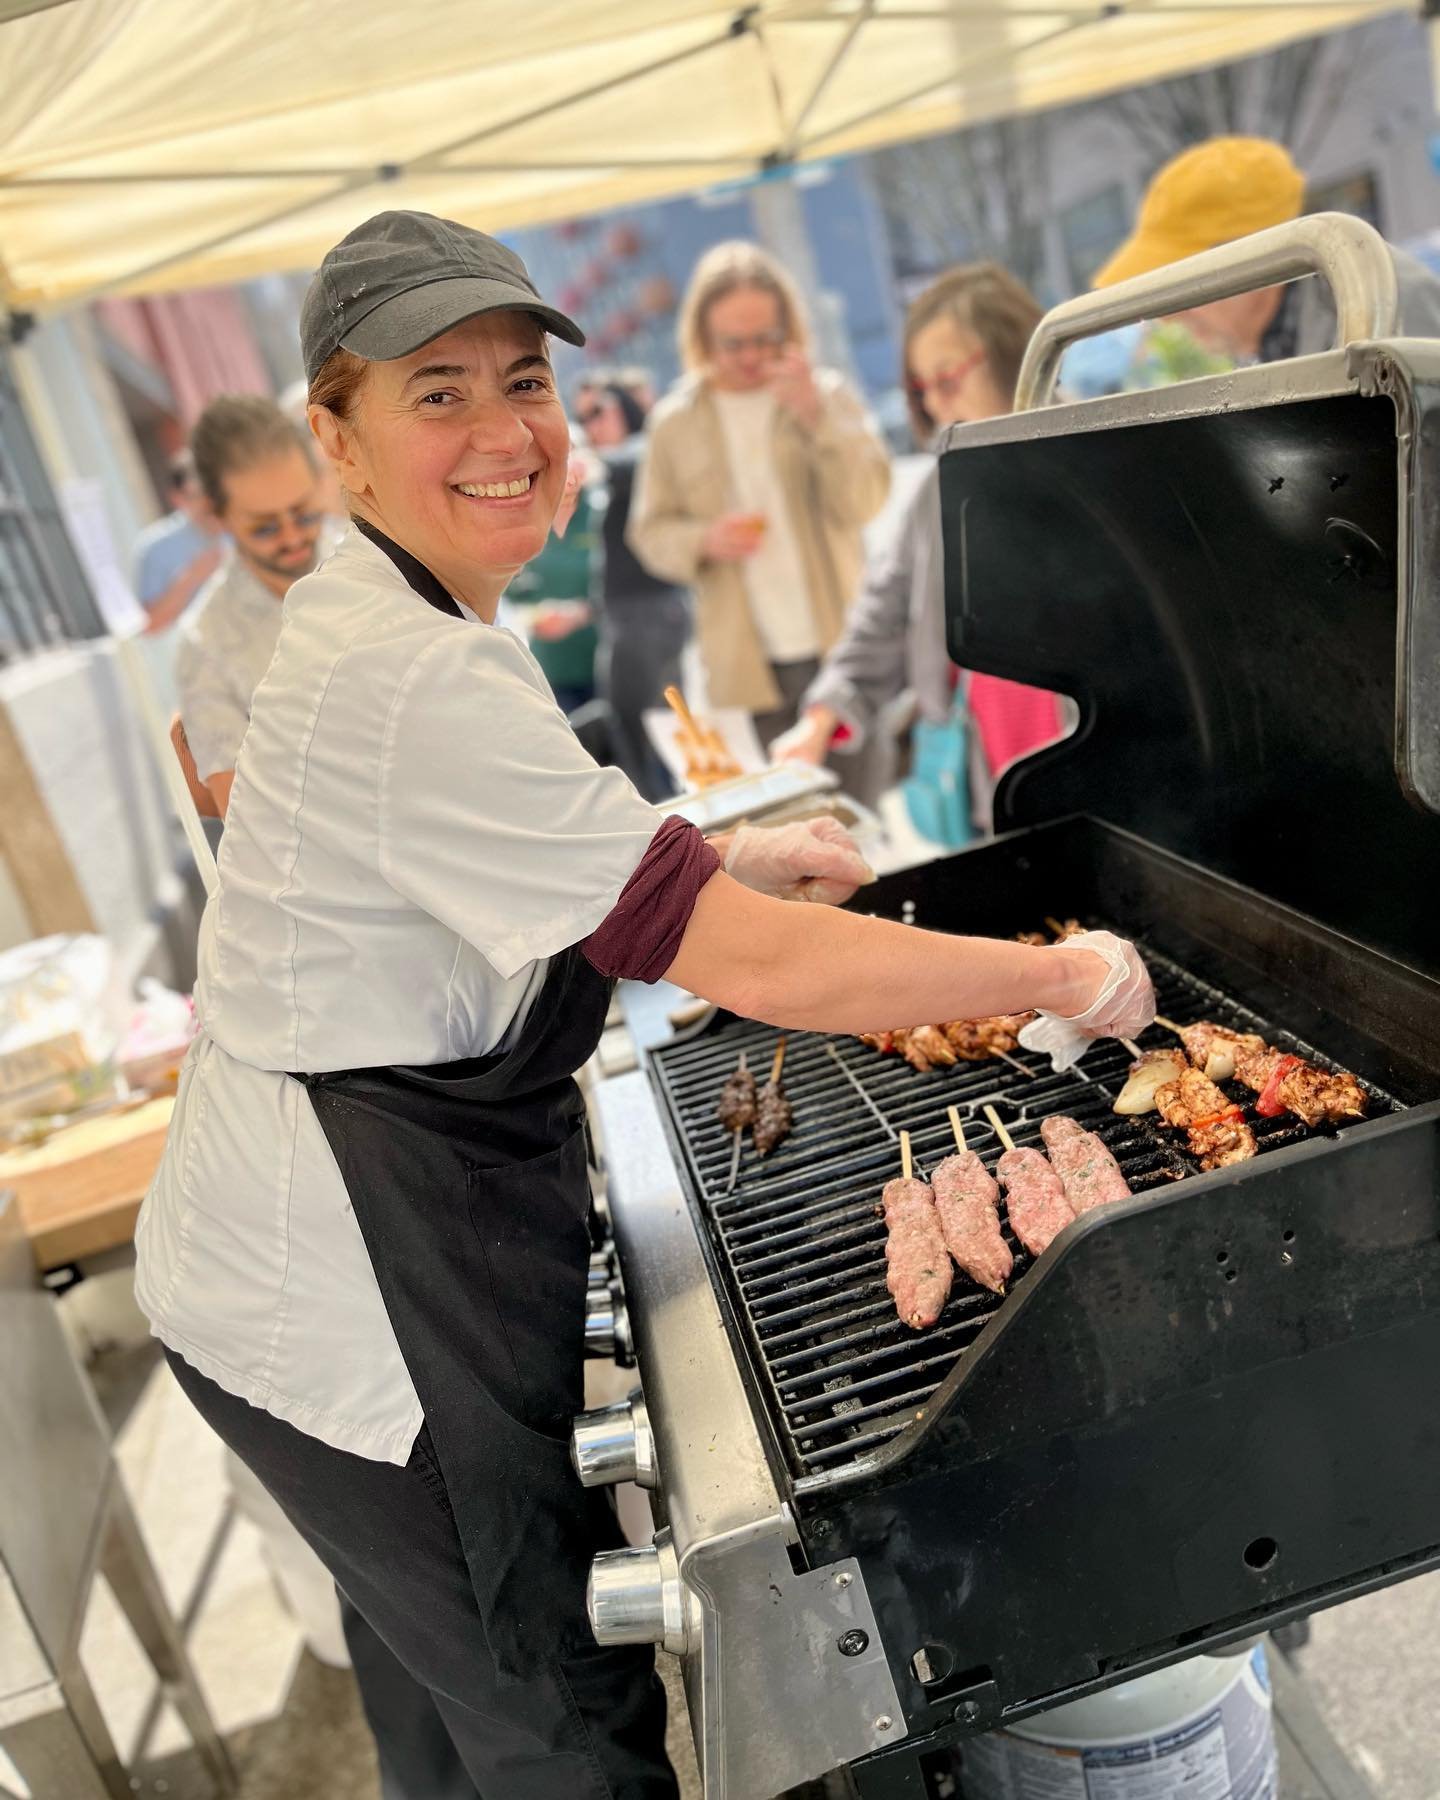 Have you checked the weather app recently? Grilling season has officially begun! ☀️ Gone are the dreary, rainy Portland days we know all too well, it&rsquo;s time to break out the grill and get cooking! Stop by our Barbur location&rsquo;s meat counte